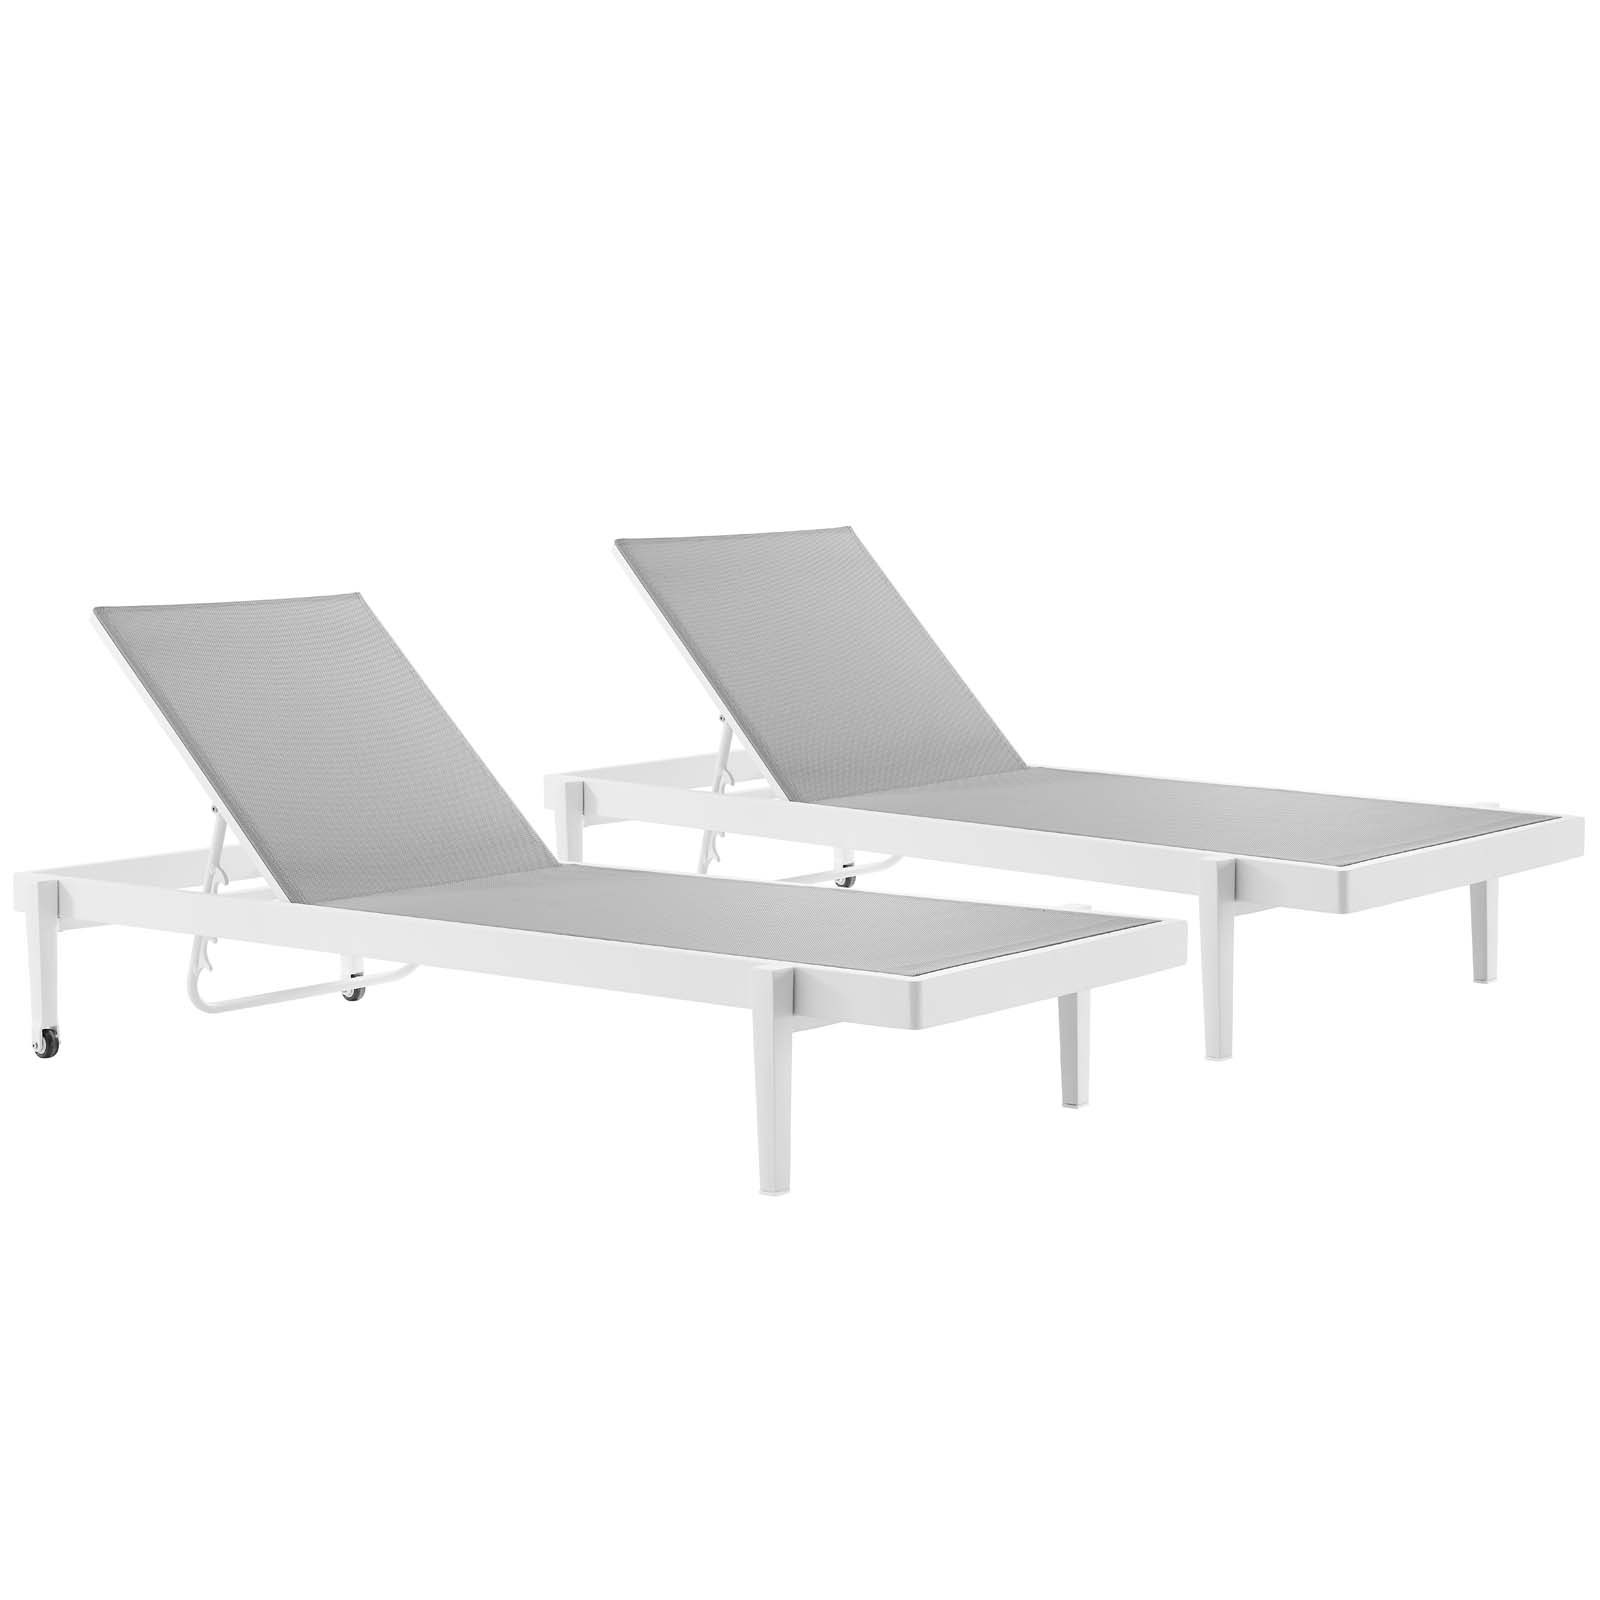 Charleston Outdoor Patio Aluminum Chaise Lounge Chair Set of 2 in White Gray